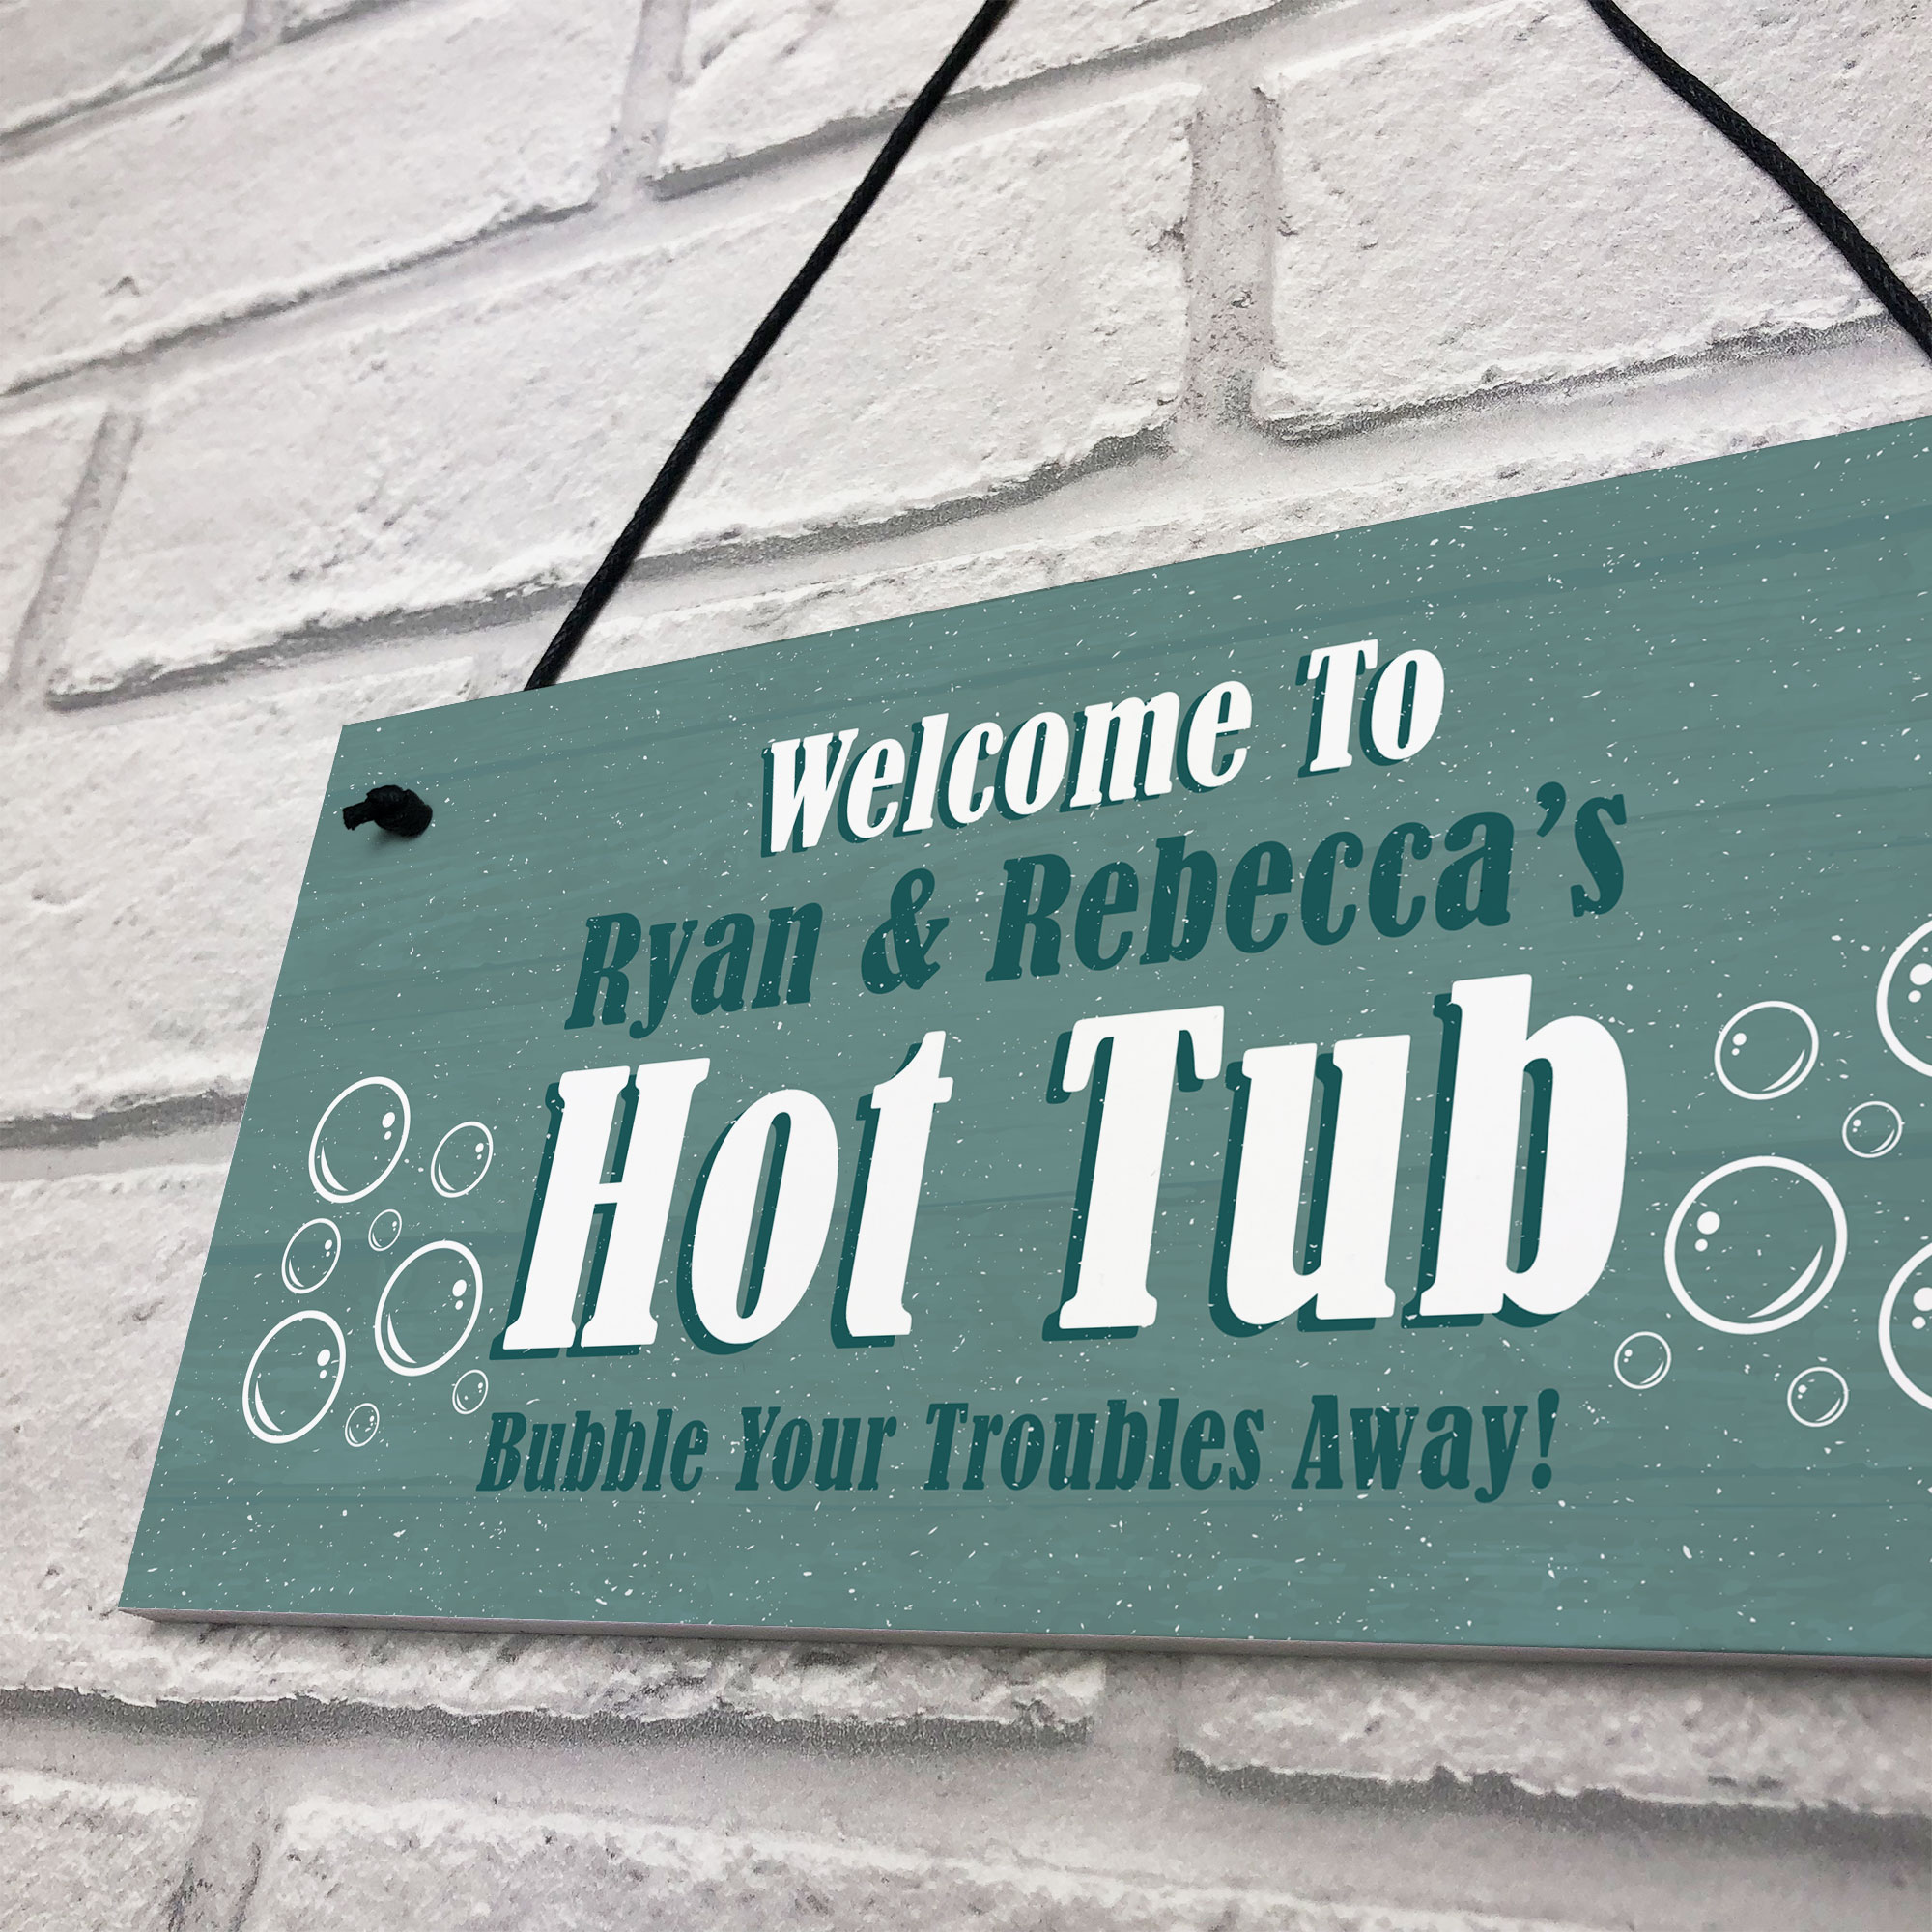 Hot Tub Personalised Plaques Novelty Home Decor Gifts Garden